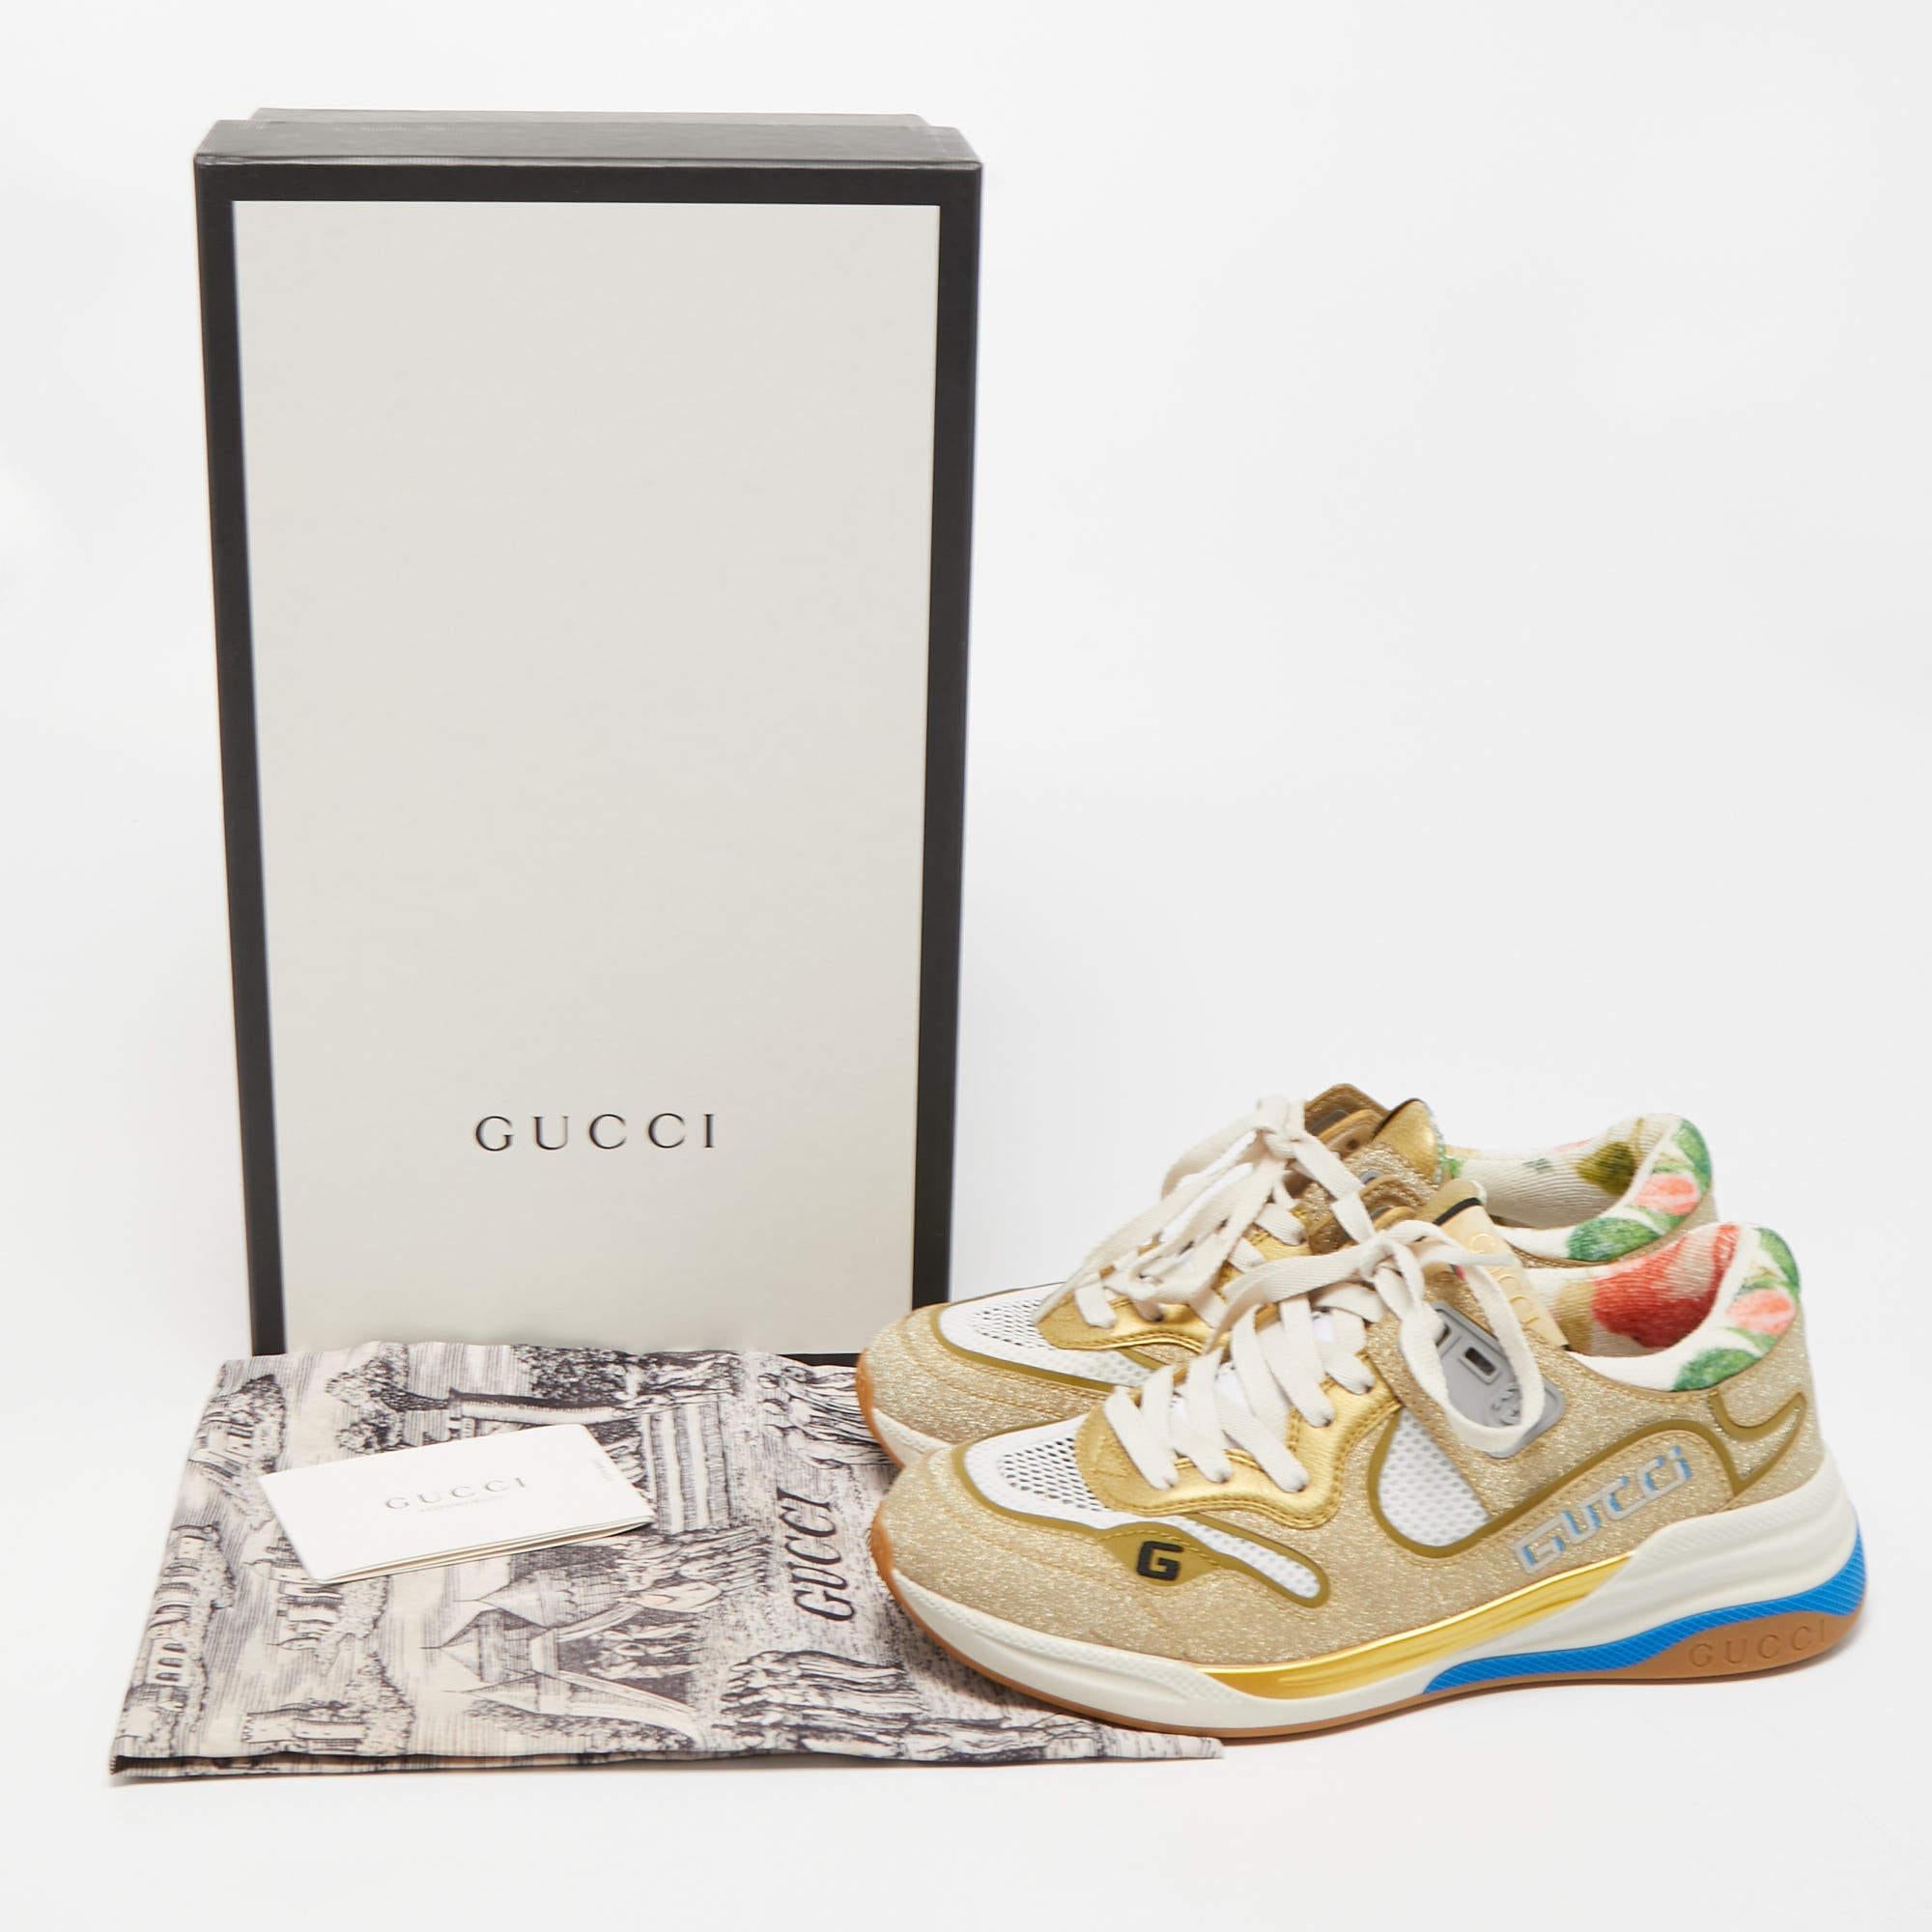 Gucci Cream/Metallic Leather and Glitter Ultrapace Low Top Sneakers Size 36.5 2